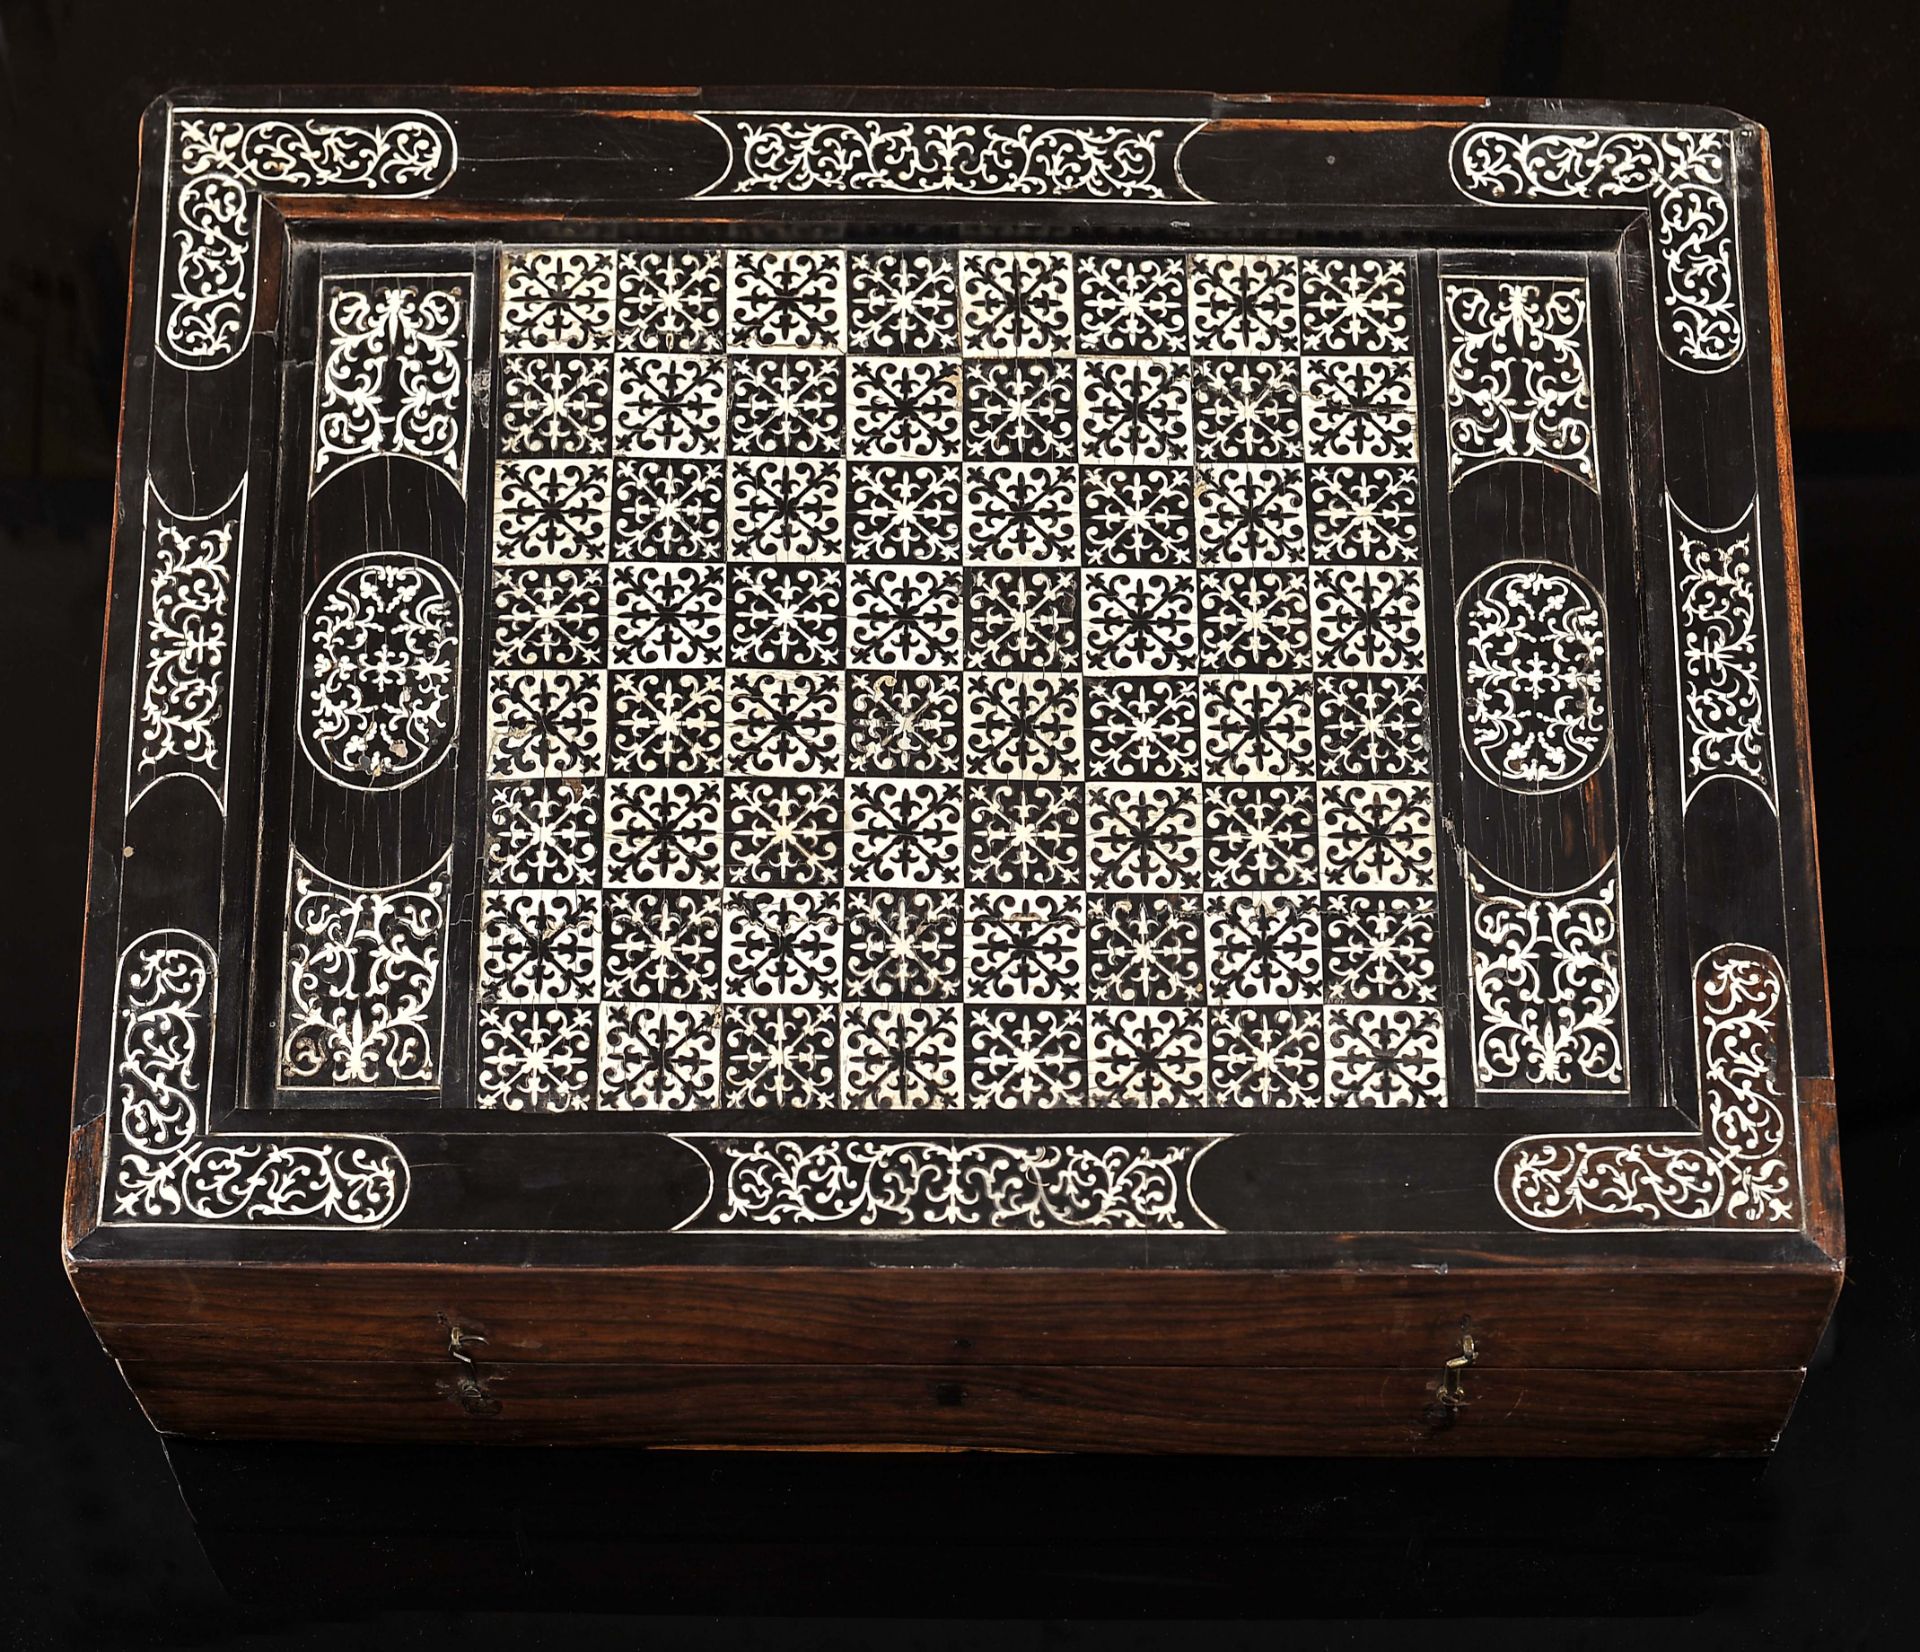 Chess, Backgammon and Nine Men's Morris Board (Ginner Game) articulated closing in the form of a box - Image 3 of 8